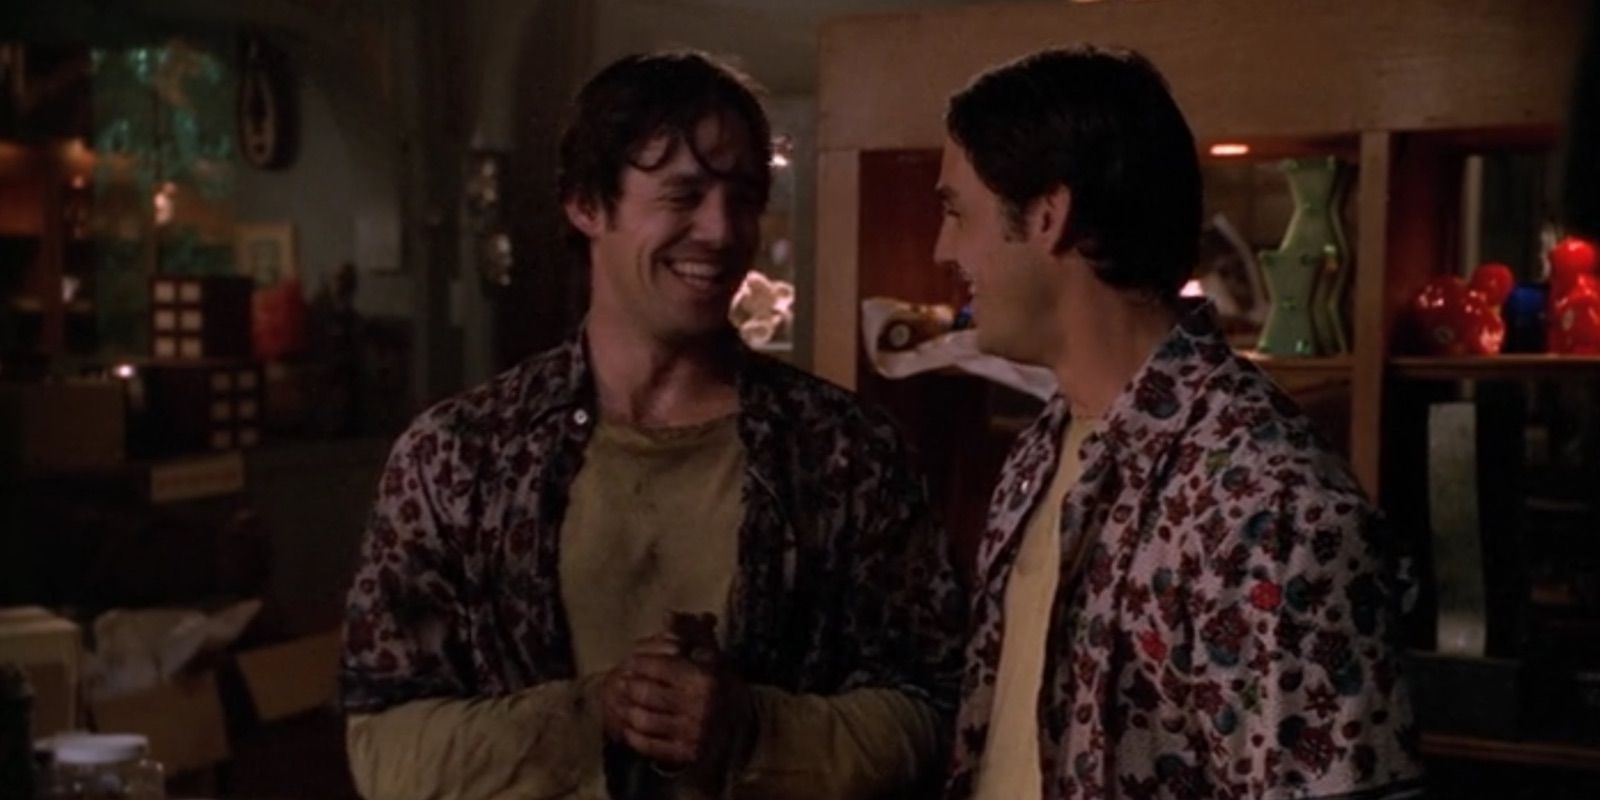 Xander laughing with his doppelganger on Buffy the Vampire Slayer